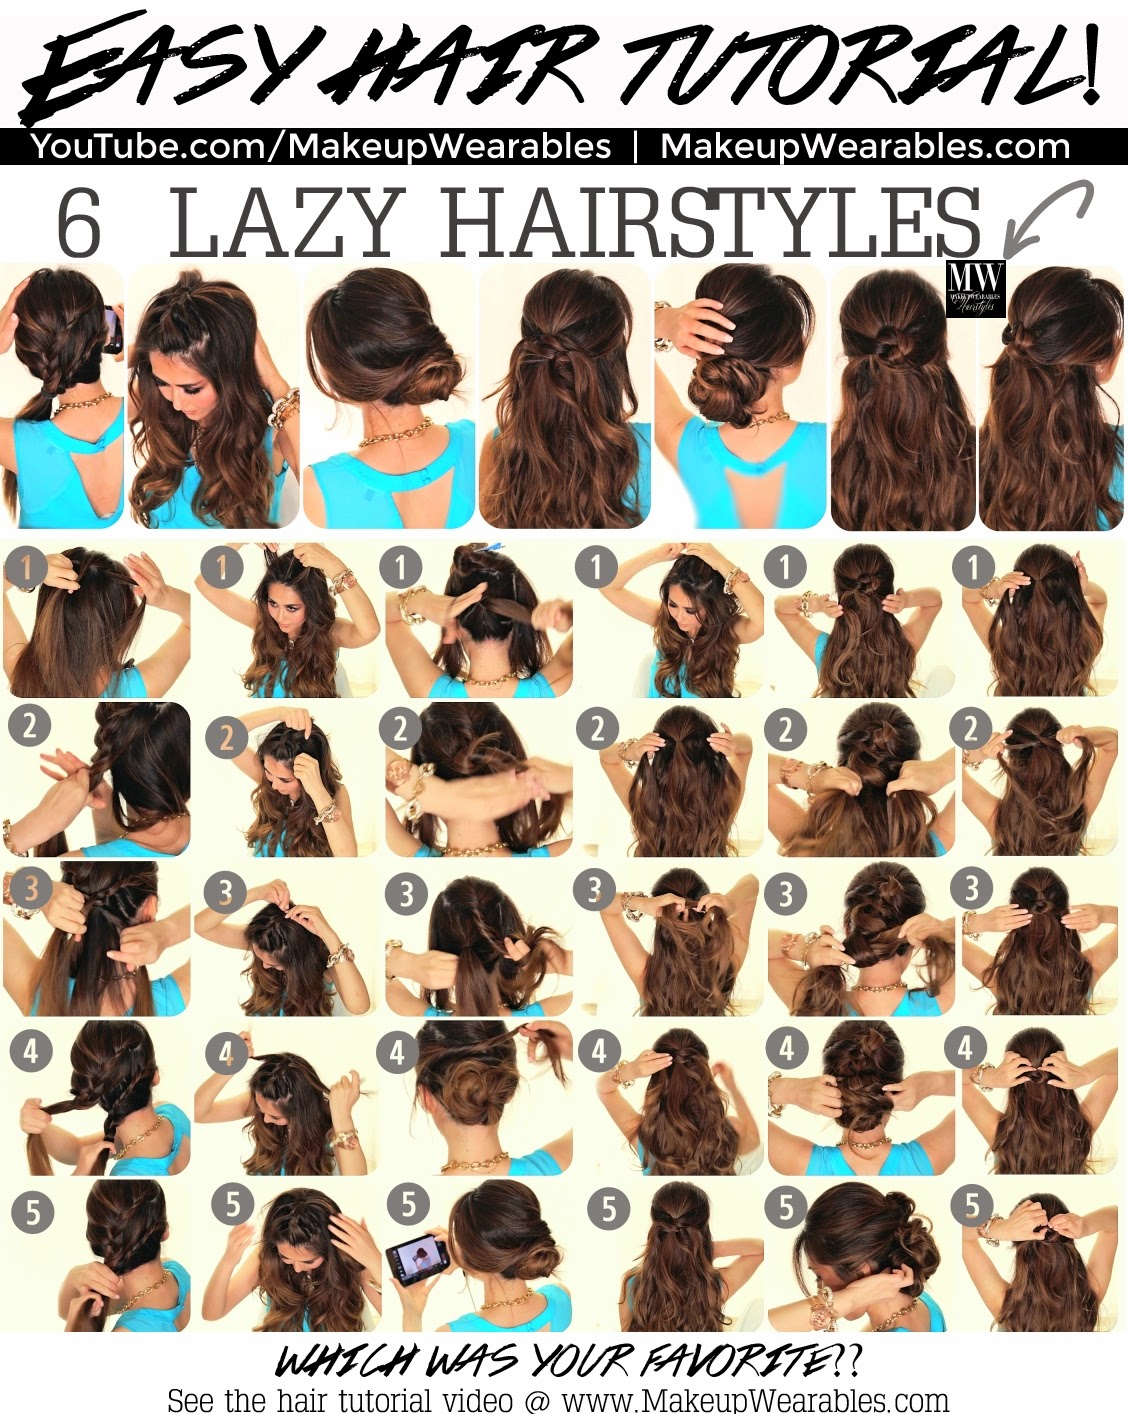 6 Easy Lazy Hairstyles | How to 5 Minute Everyday Hairstyles